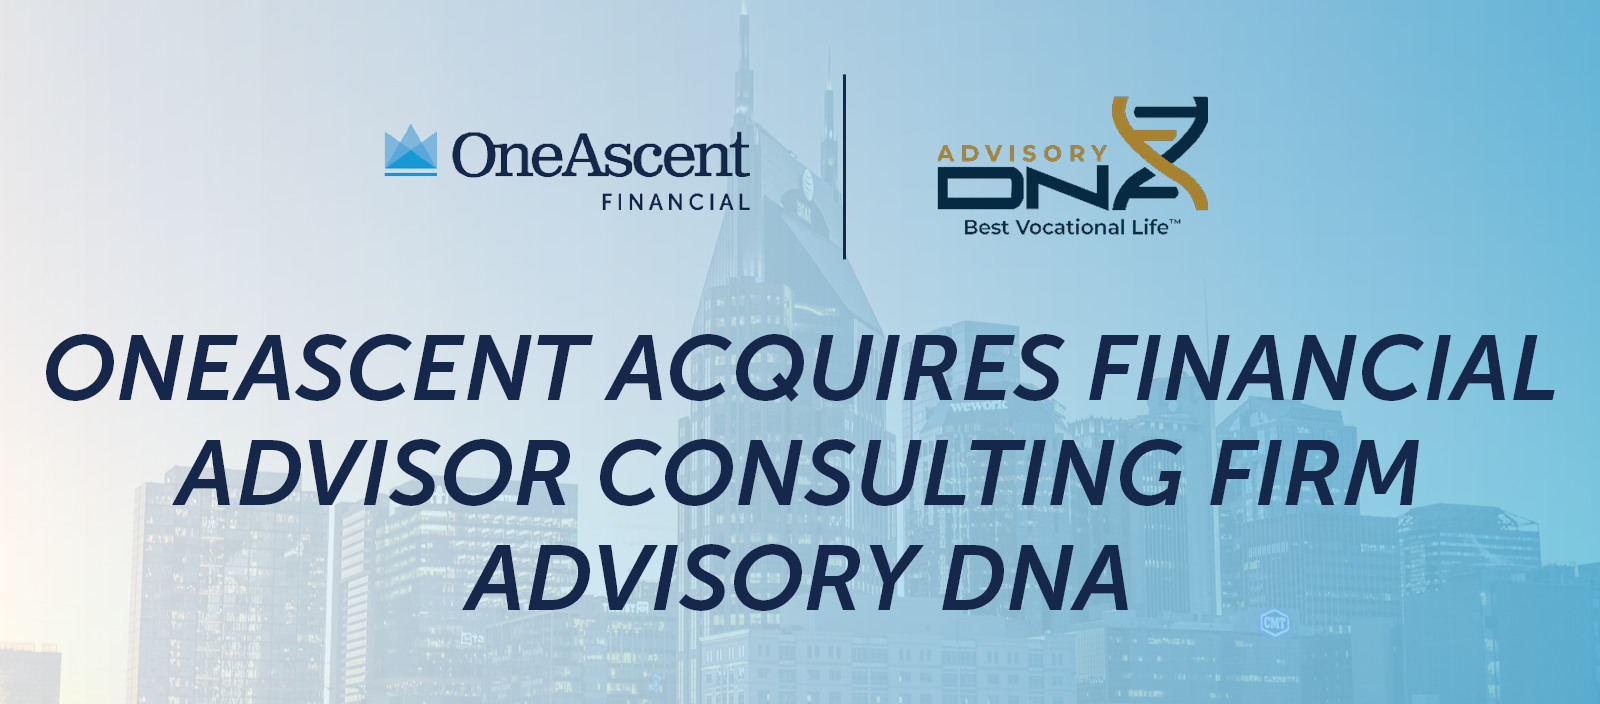 OneAscent acquires Advisory DNA